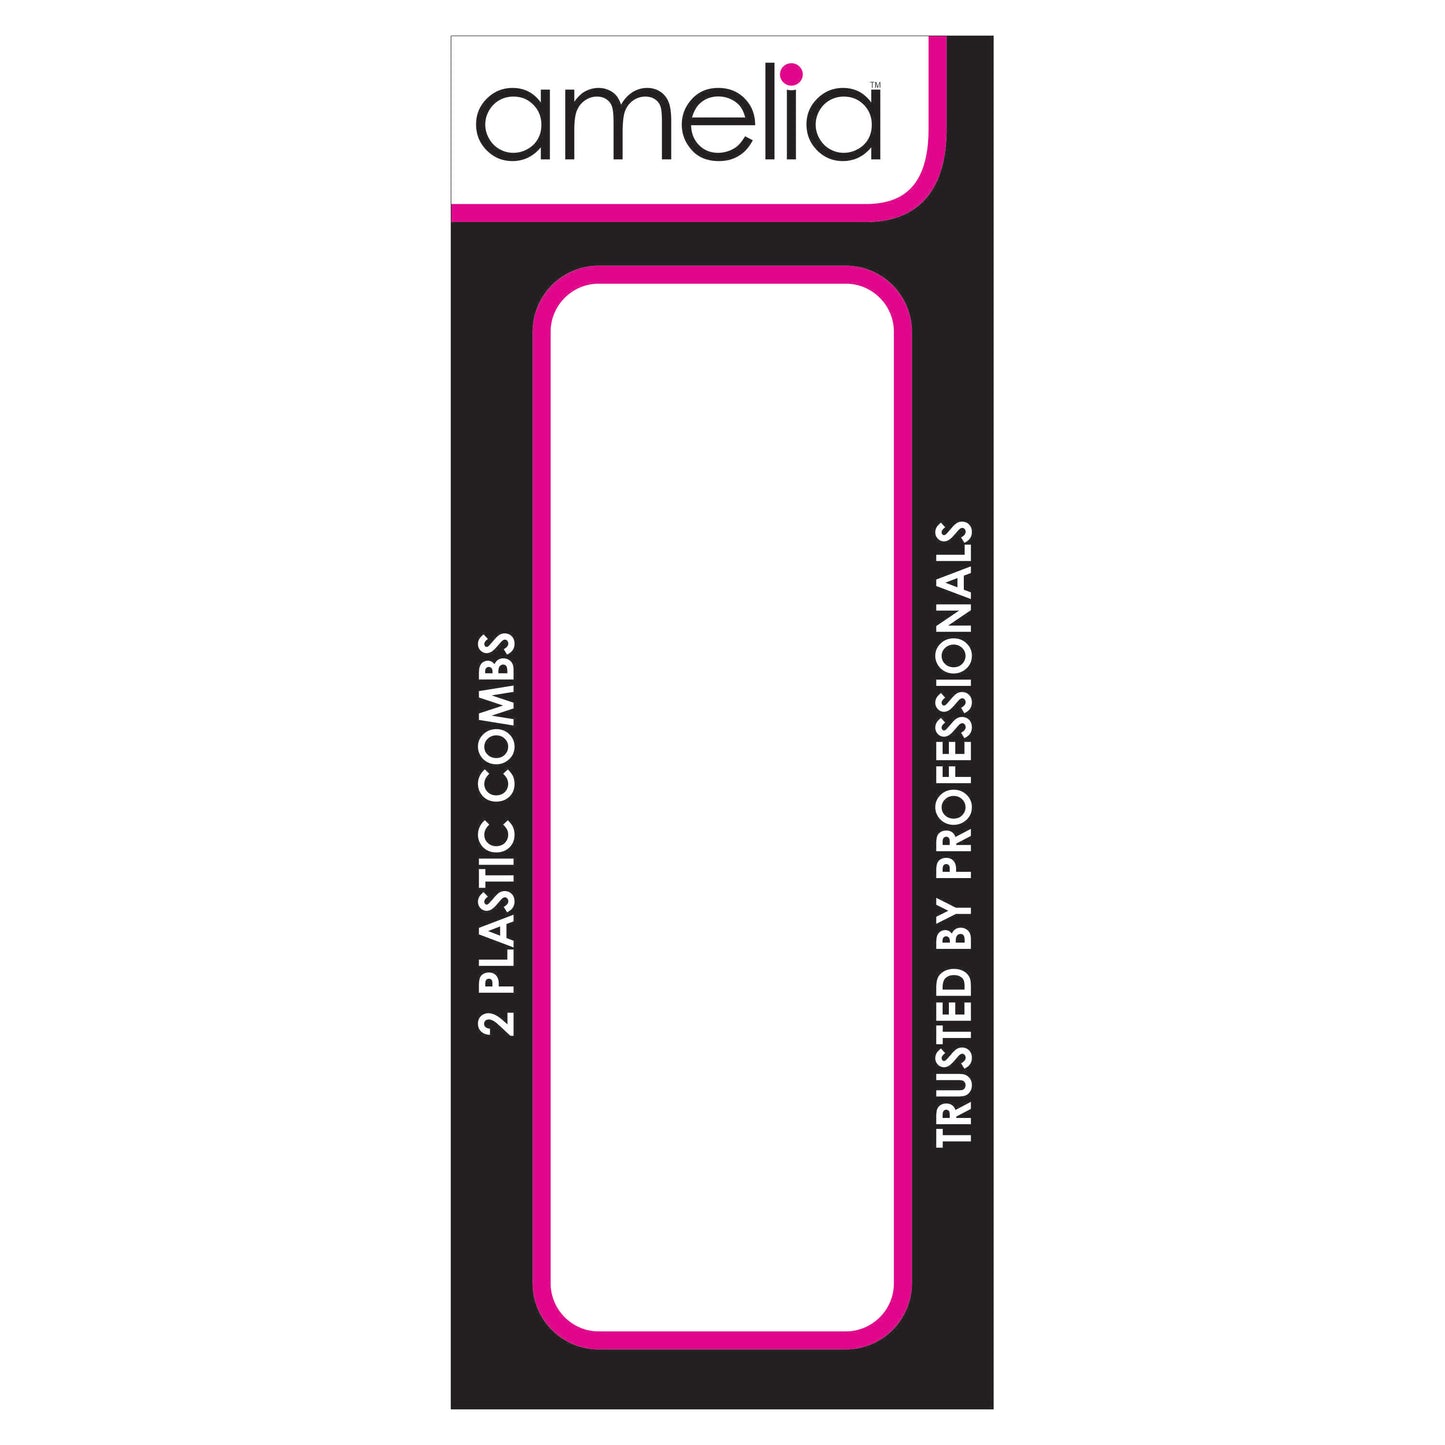 Amelia Beauty, 8.5in Black Plastic Handle Comb, Made in USA, Professional Grade Hair Comb, For Combing Out Long Thick Hair, Wet or Dry, Everyday Styling Cutting Hair Styling Tool, 8.5"x1.5", 2 Pack